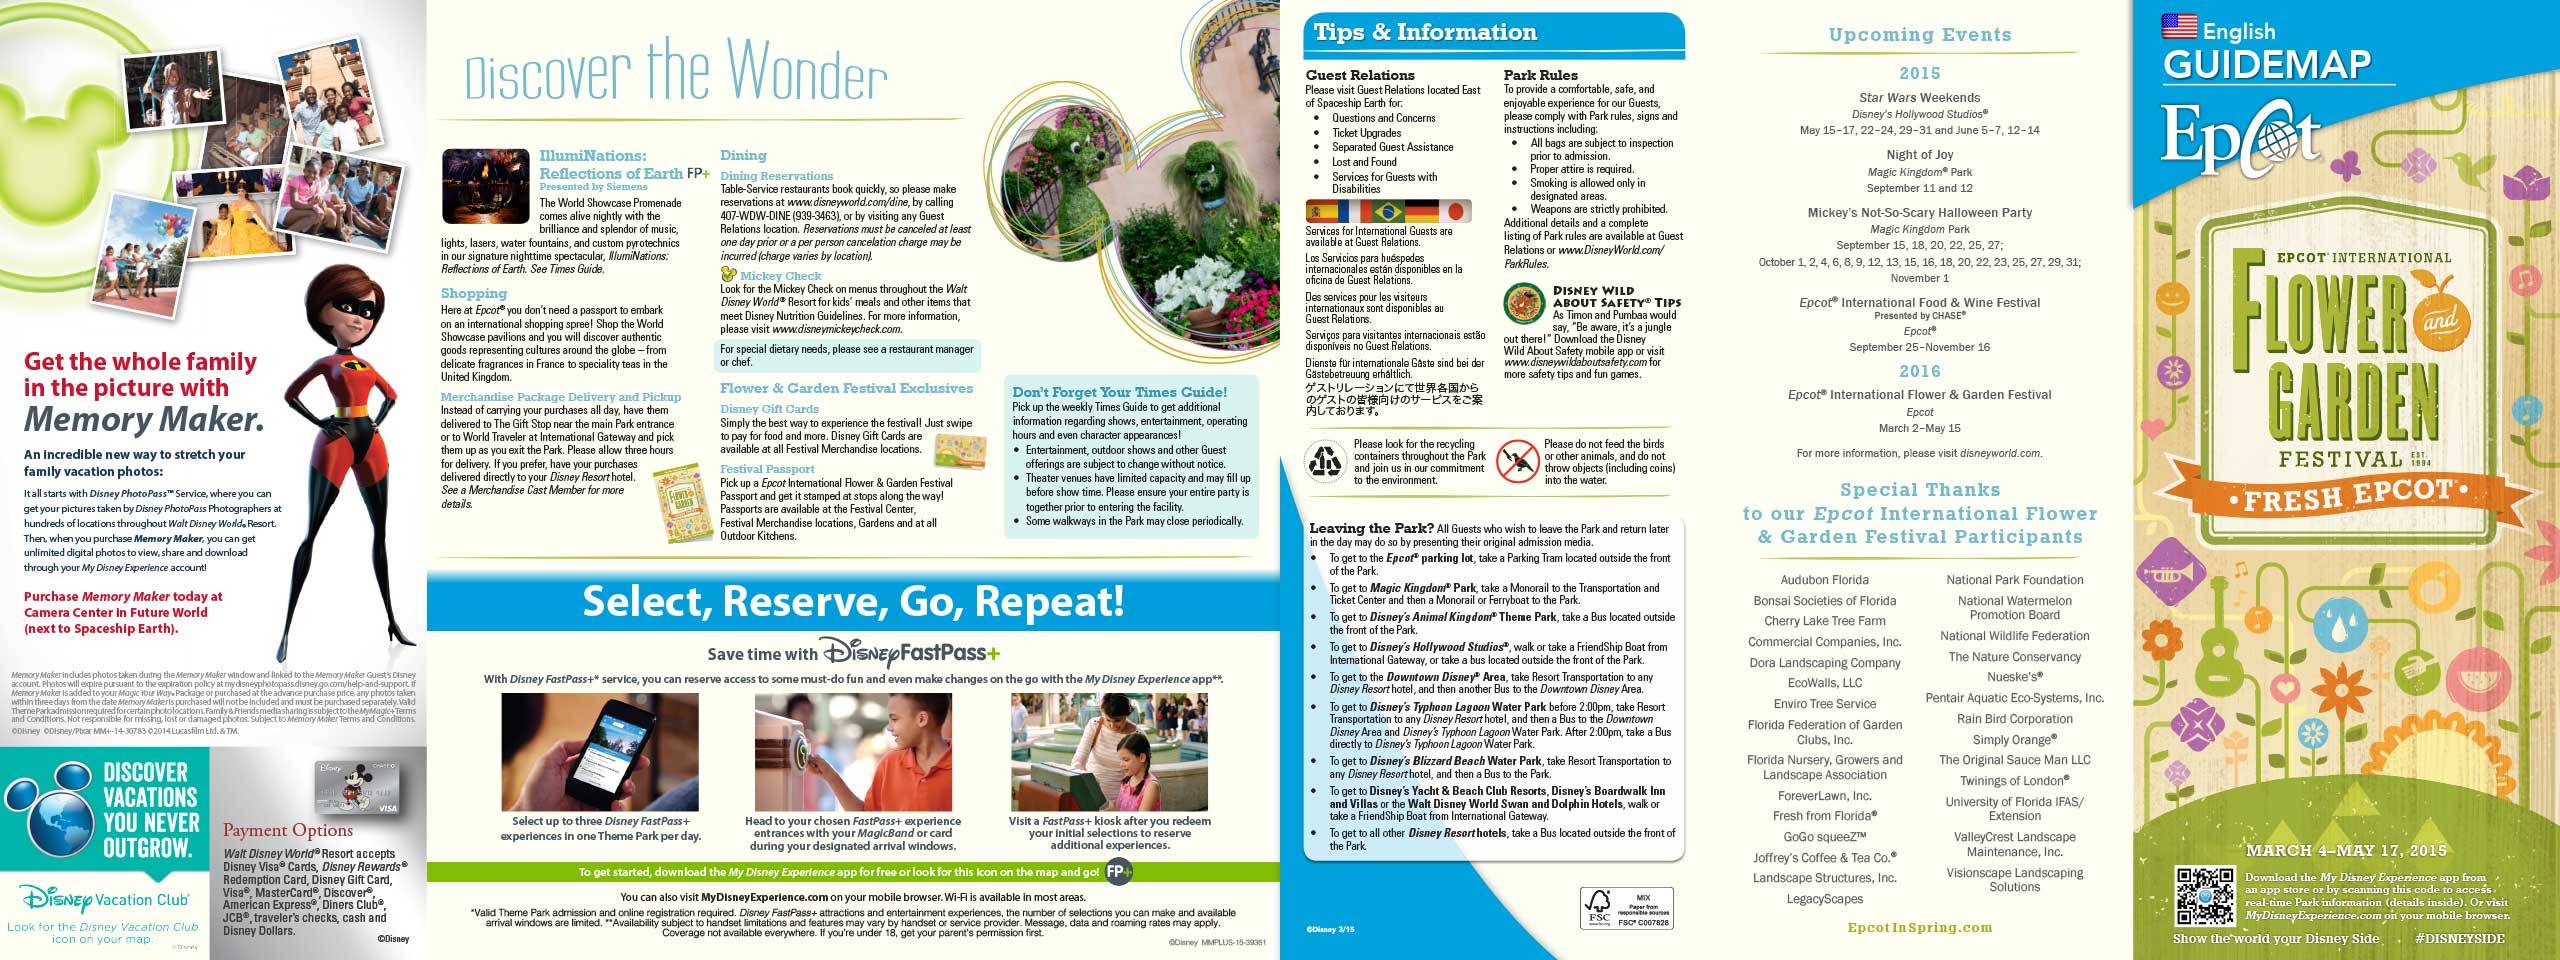 2015 Epcot Flower and Garden Festival guide map